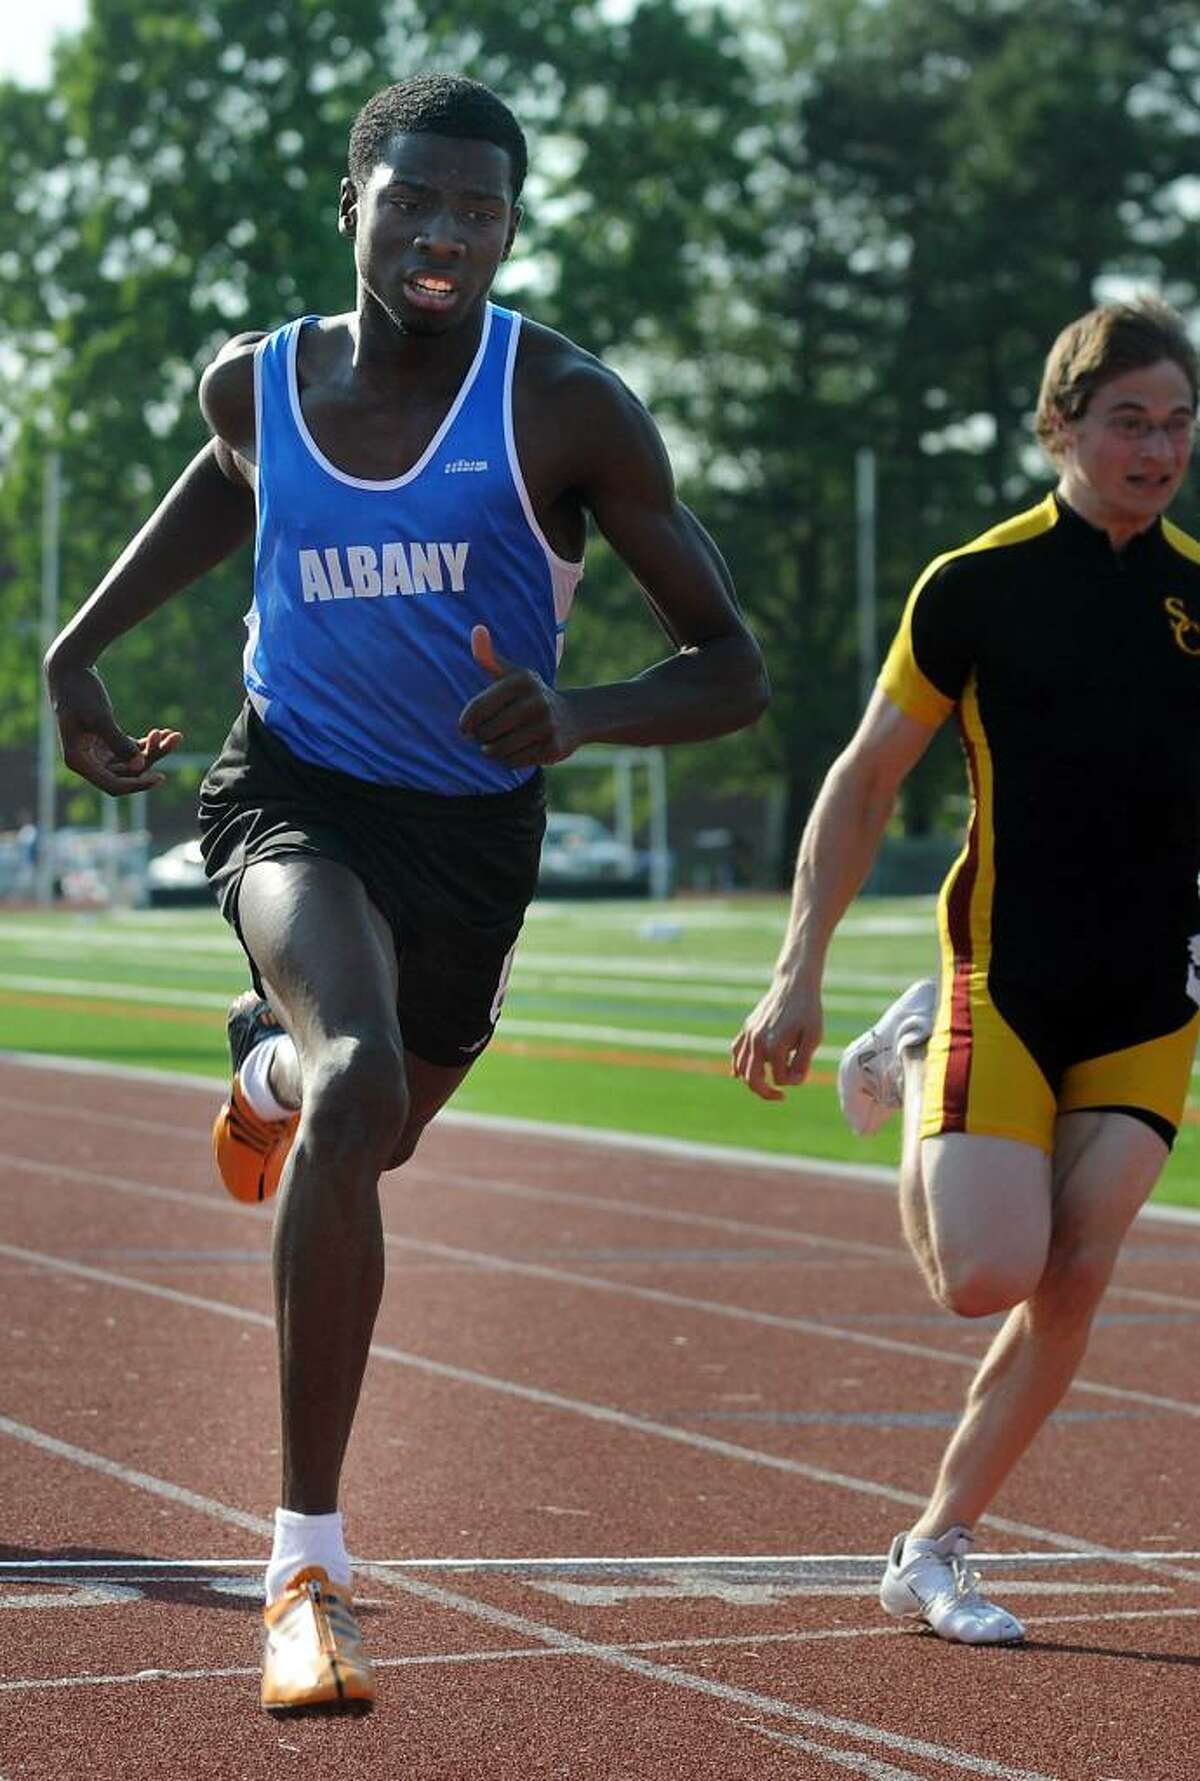 Albany's Kareem Morris, left, crosses the line to win the 100-meter run during the Section II track meet on Thursday, May 27, 2010, at Shenendehowa High. (Cindy Schultz / Times Union)